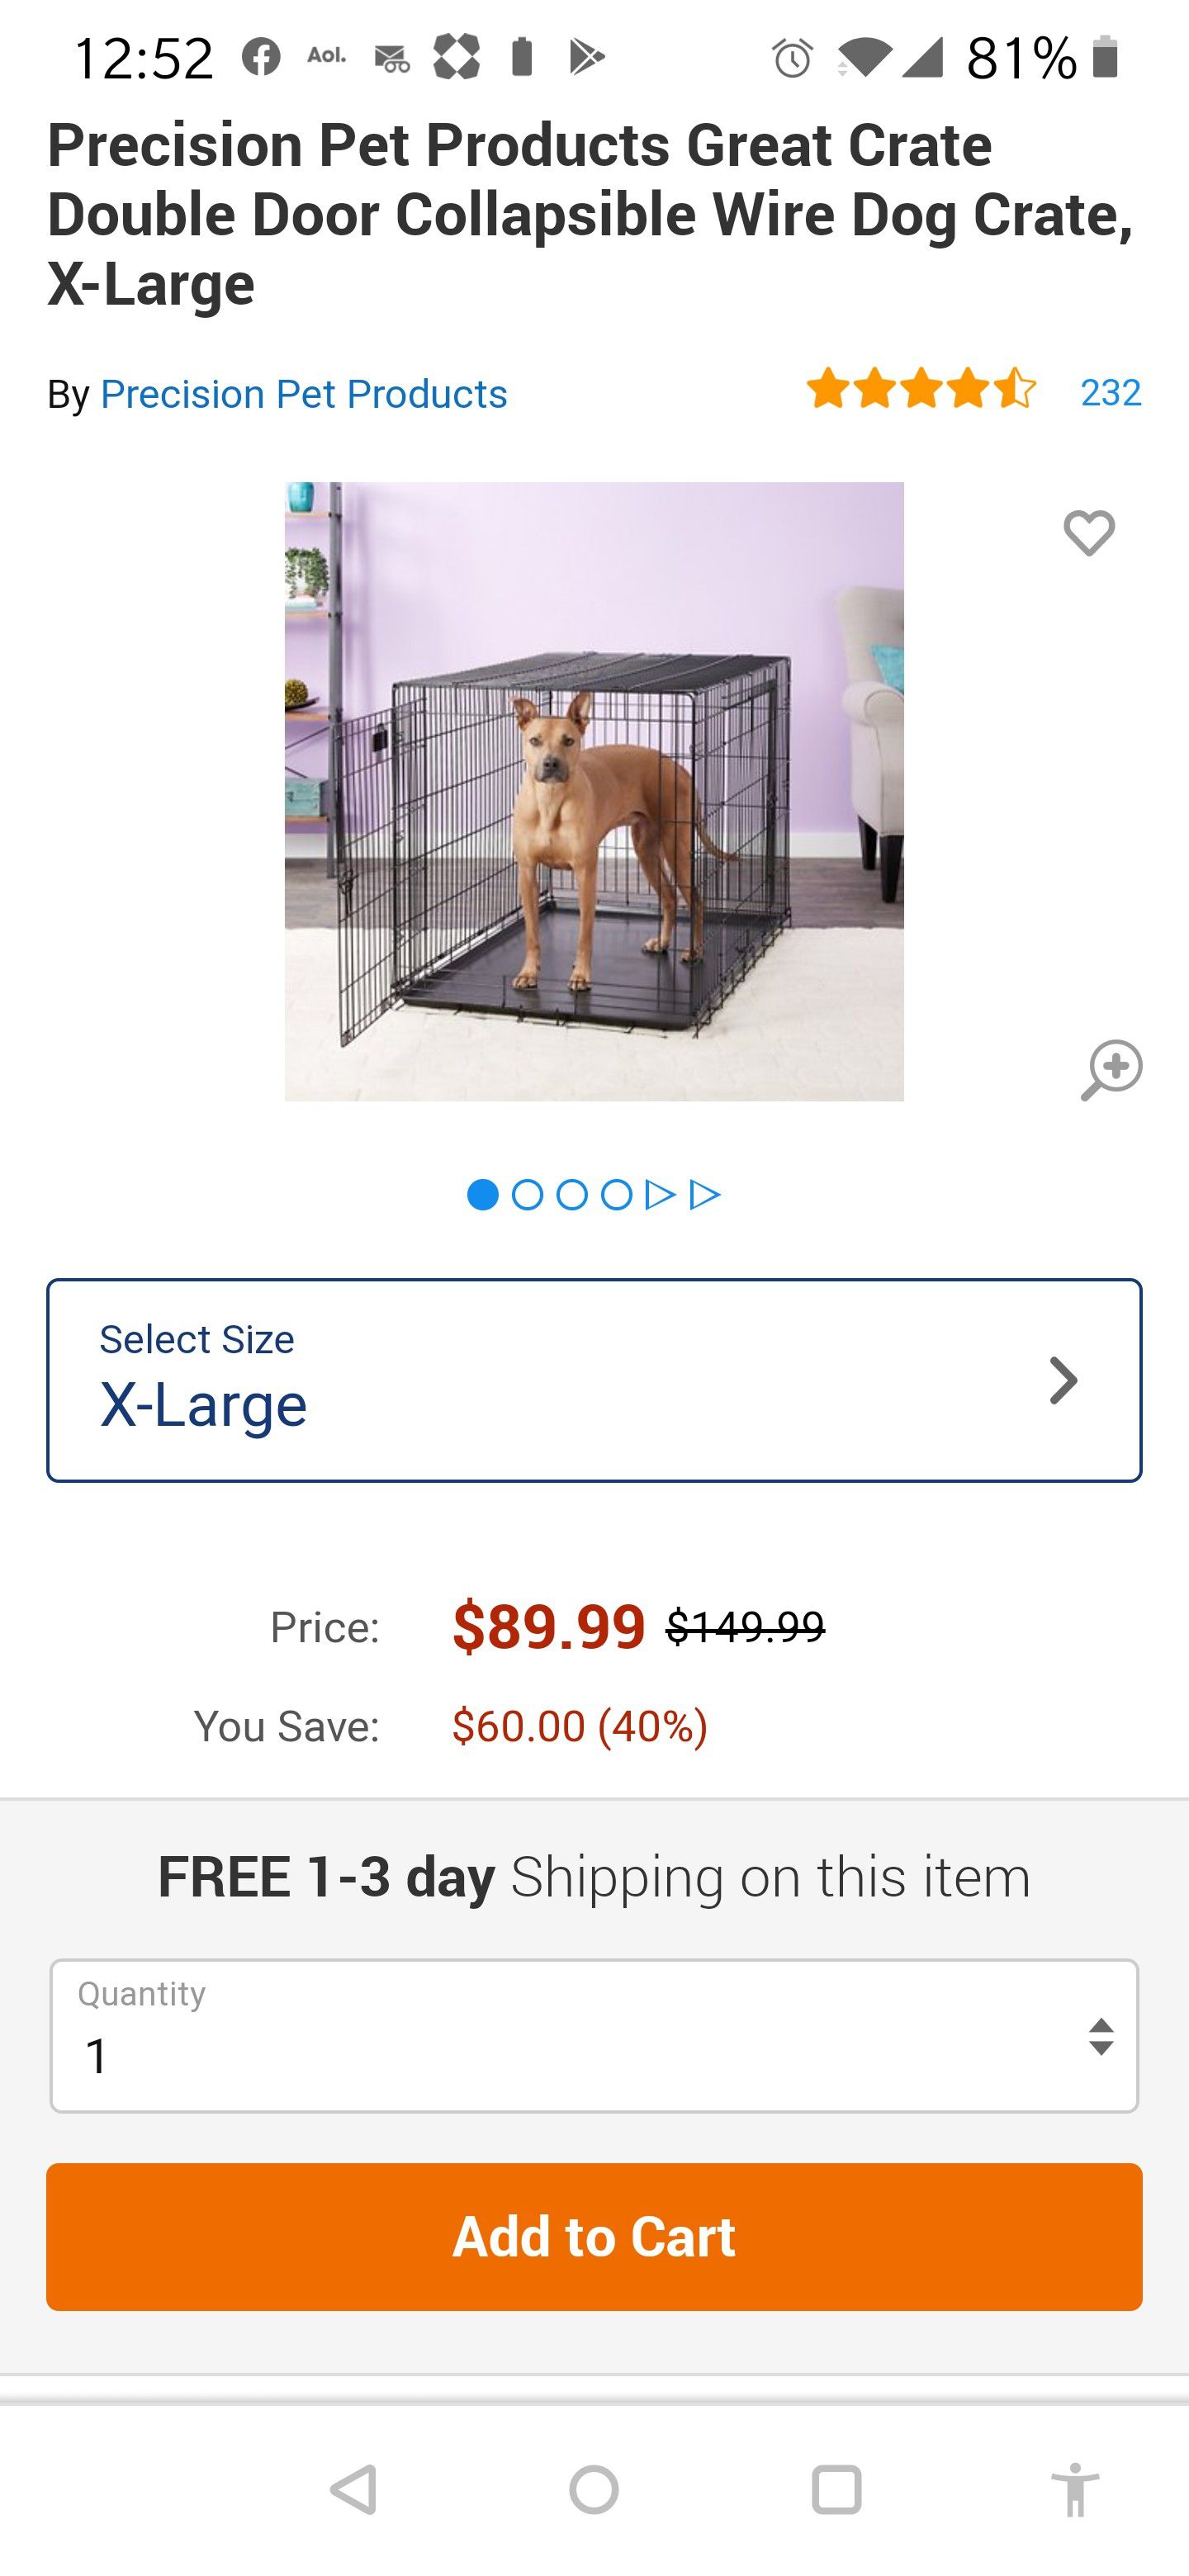 Must go! Dog crate, x-large, double doors, collapsible